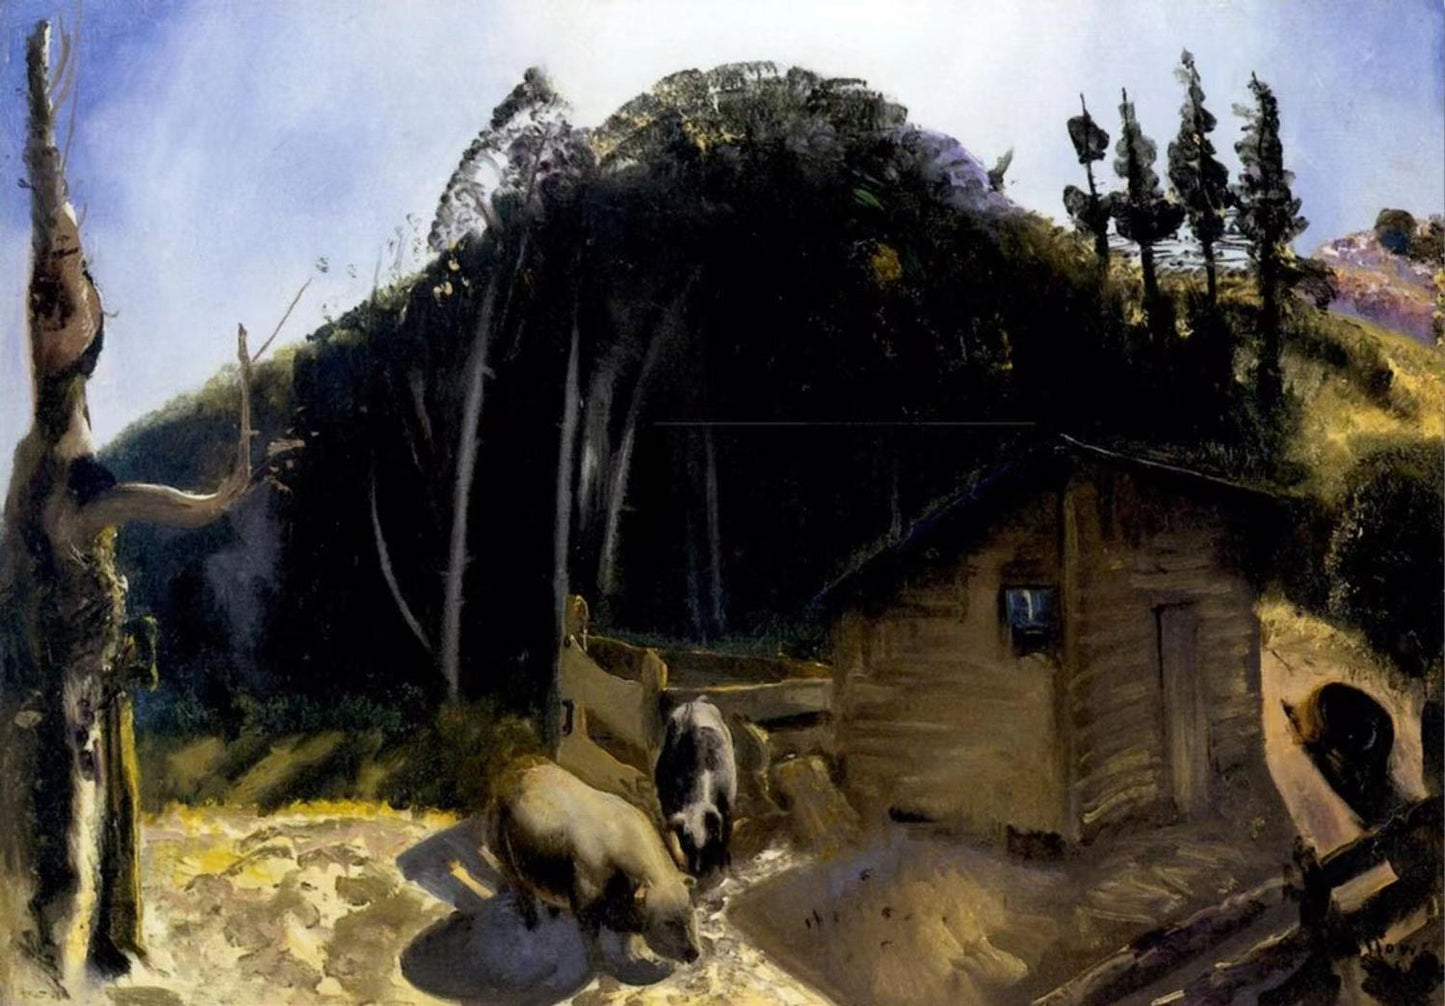 Three Pigs and a Mountain , George Bellows